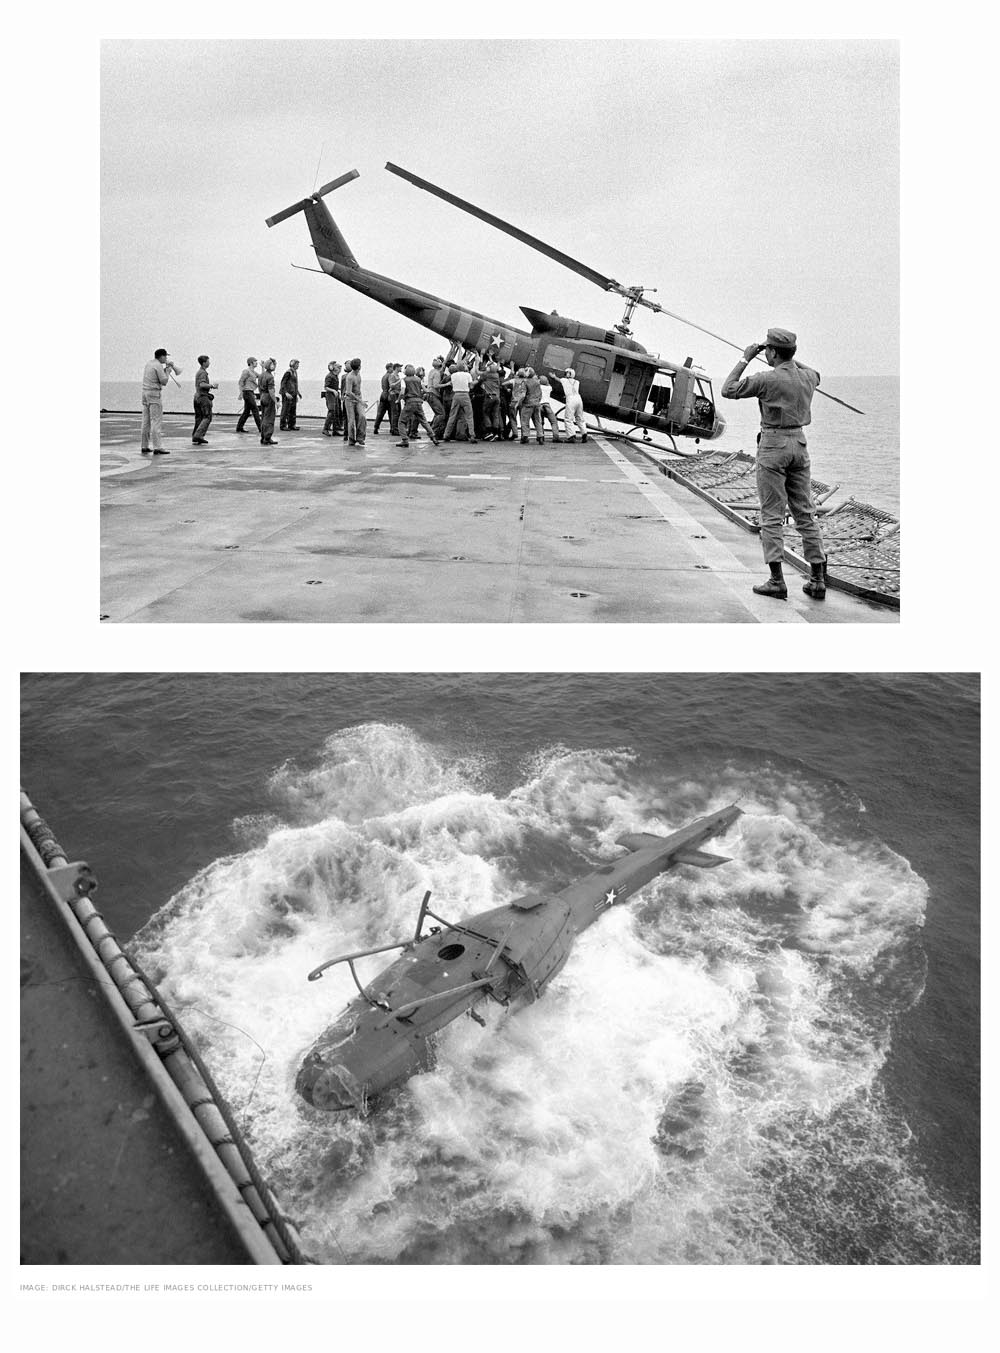 Pushing Helicopter Overboard